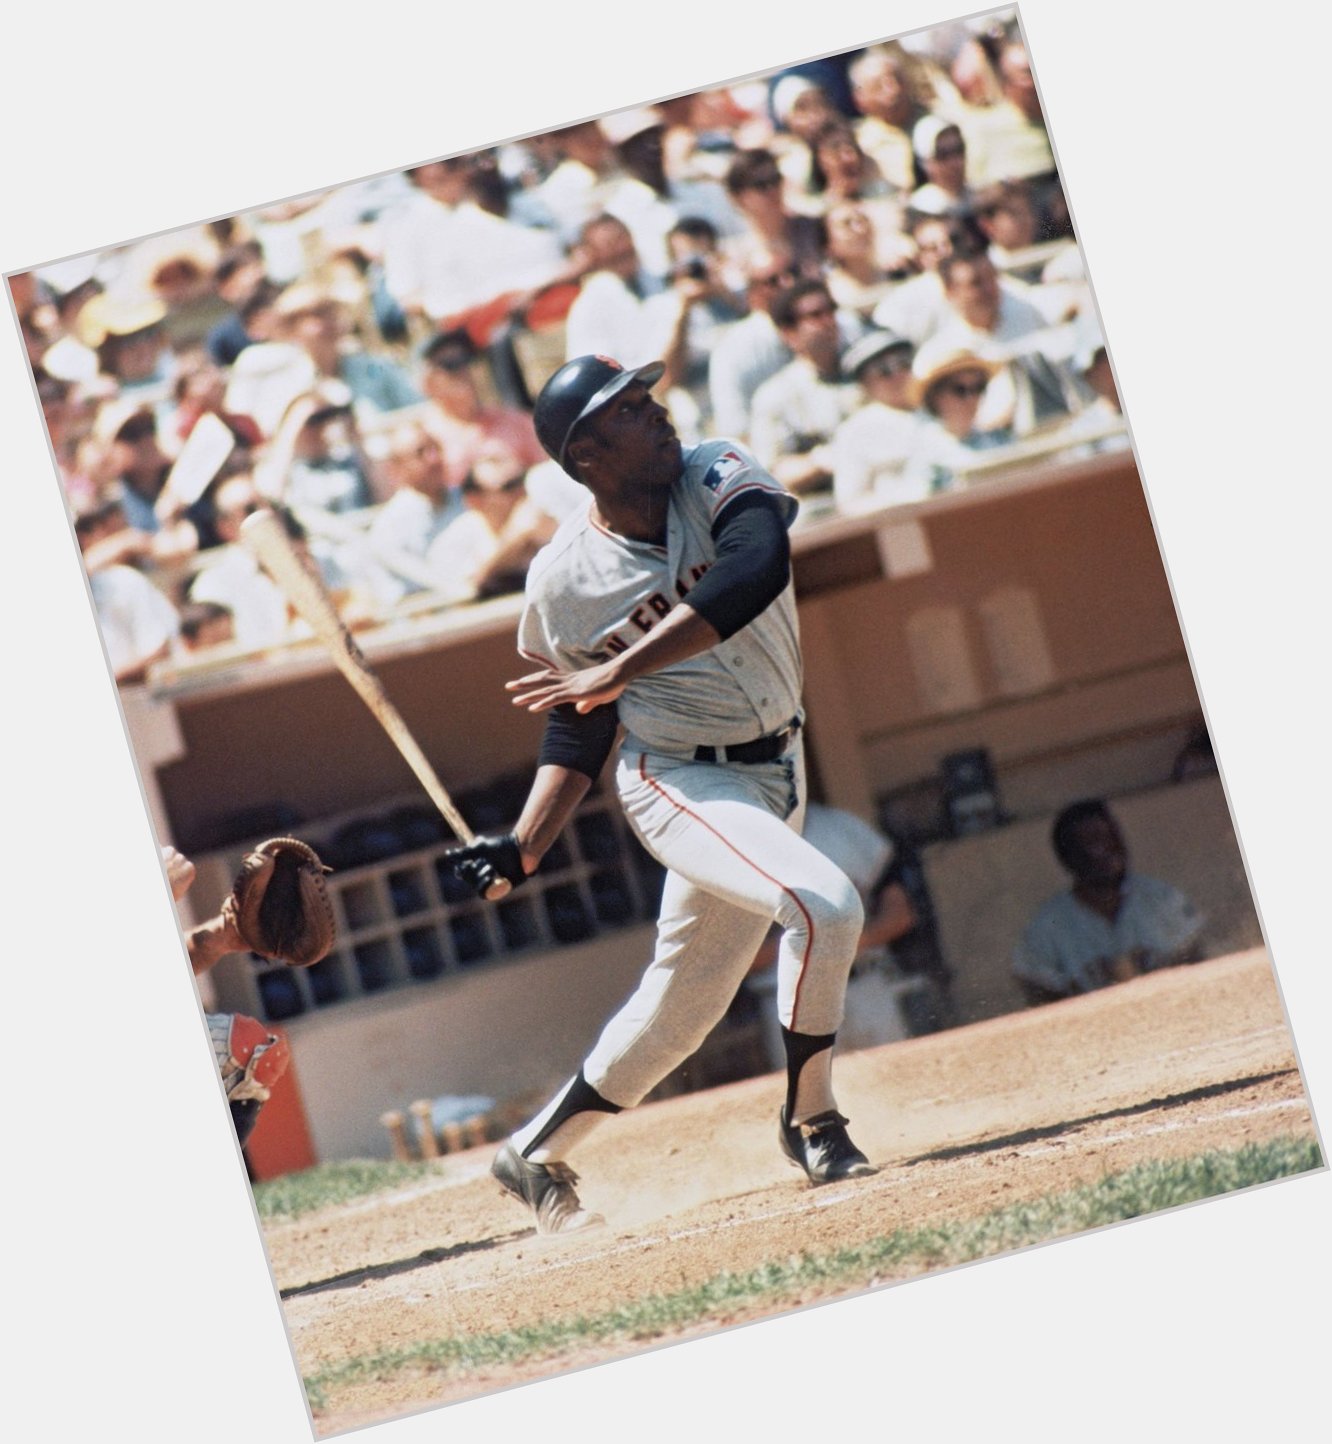 Happy Birthday to Willie McCovey, who turns 80 today! 